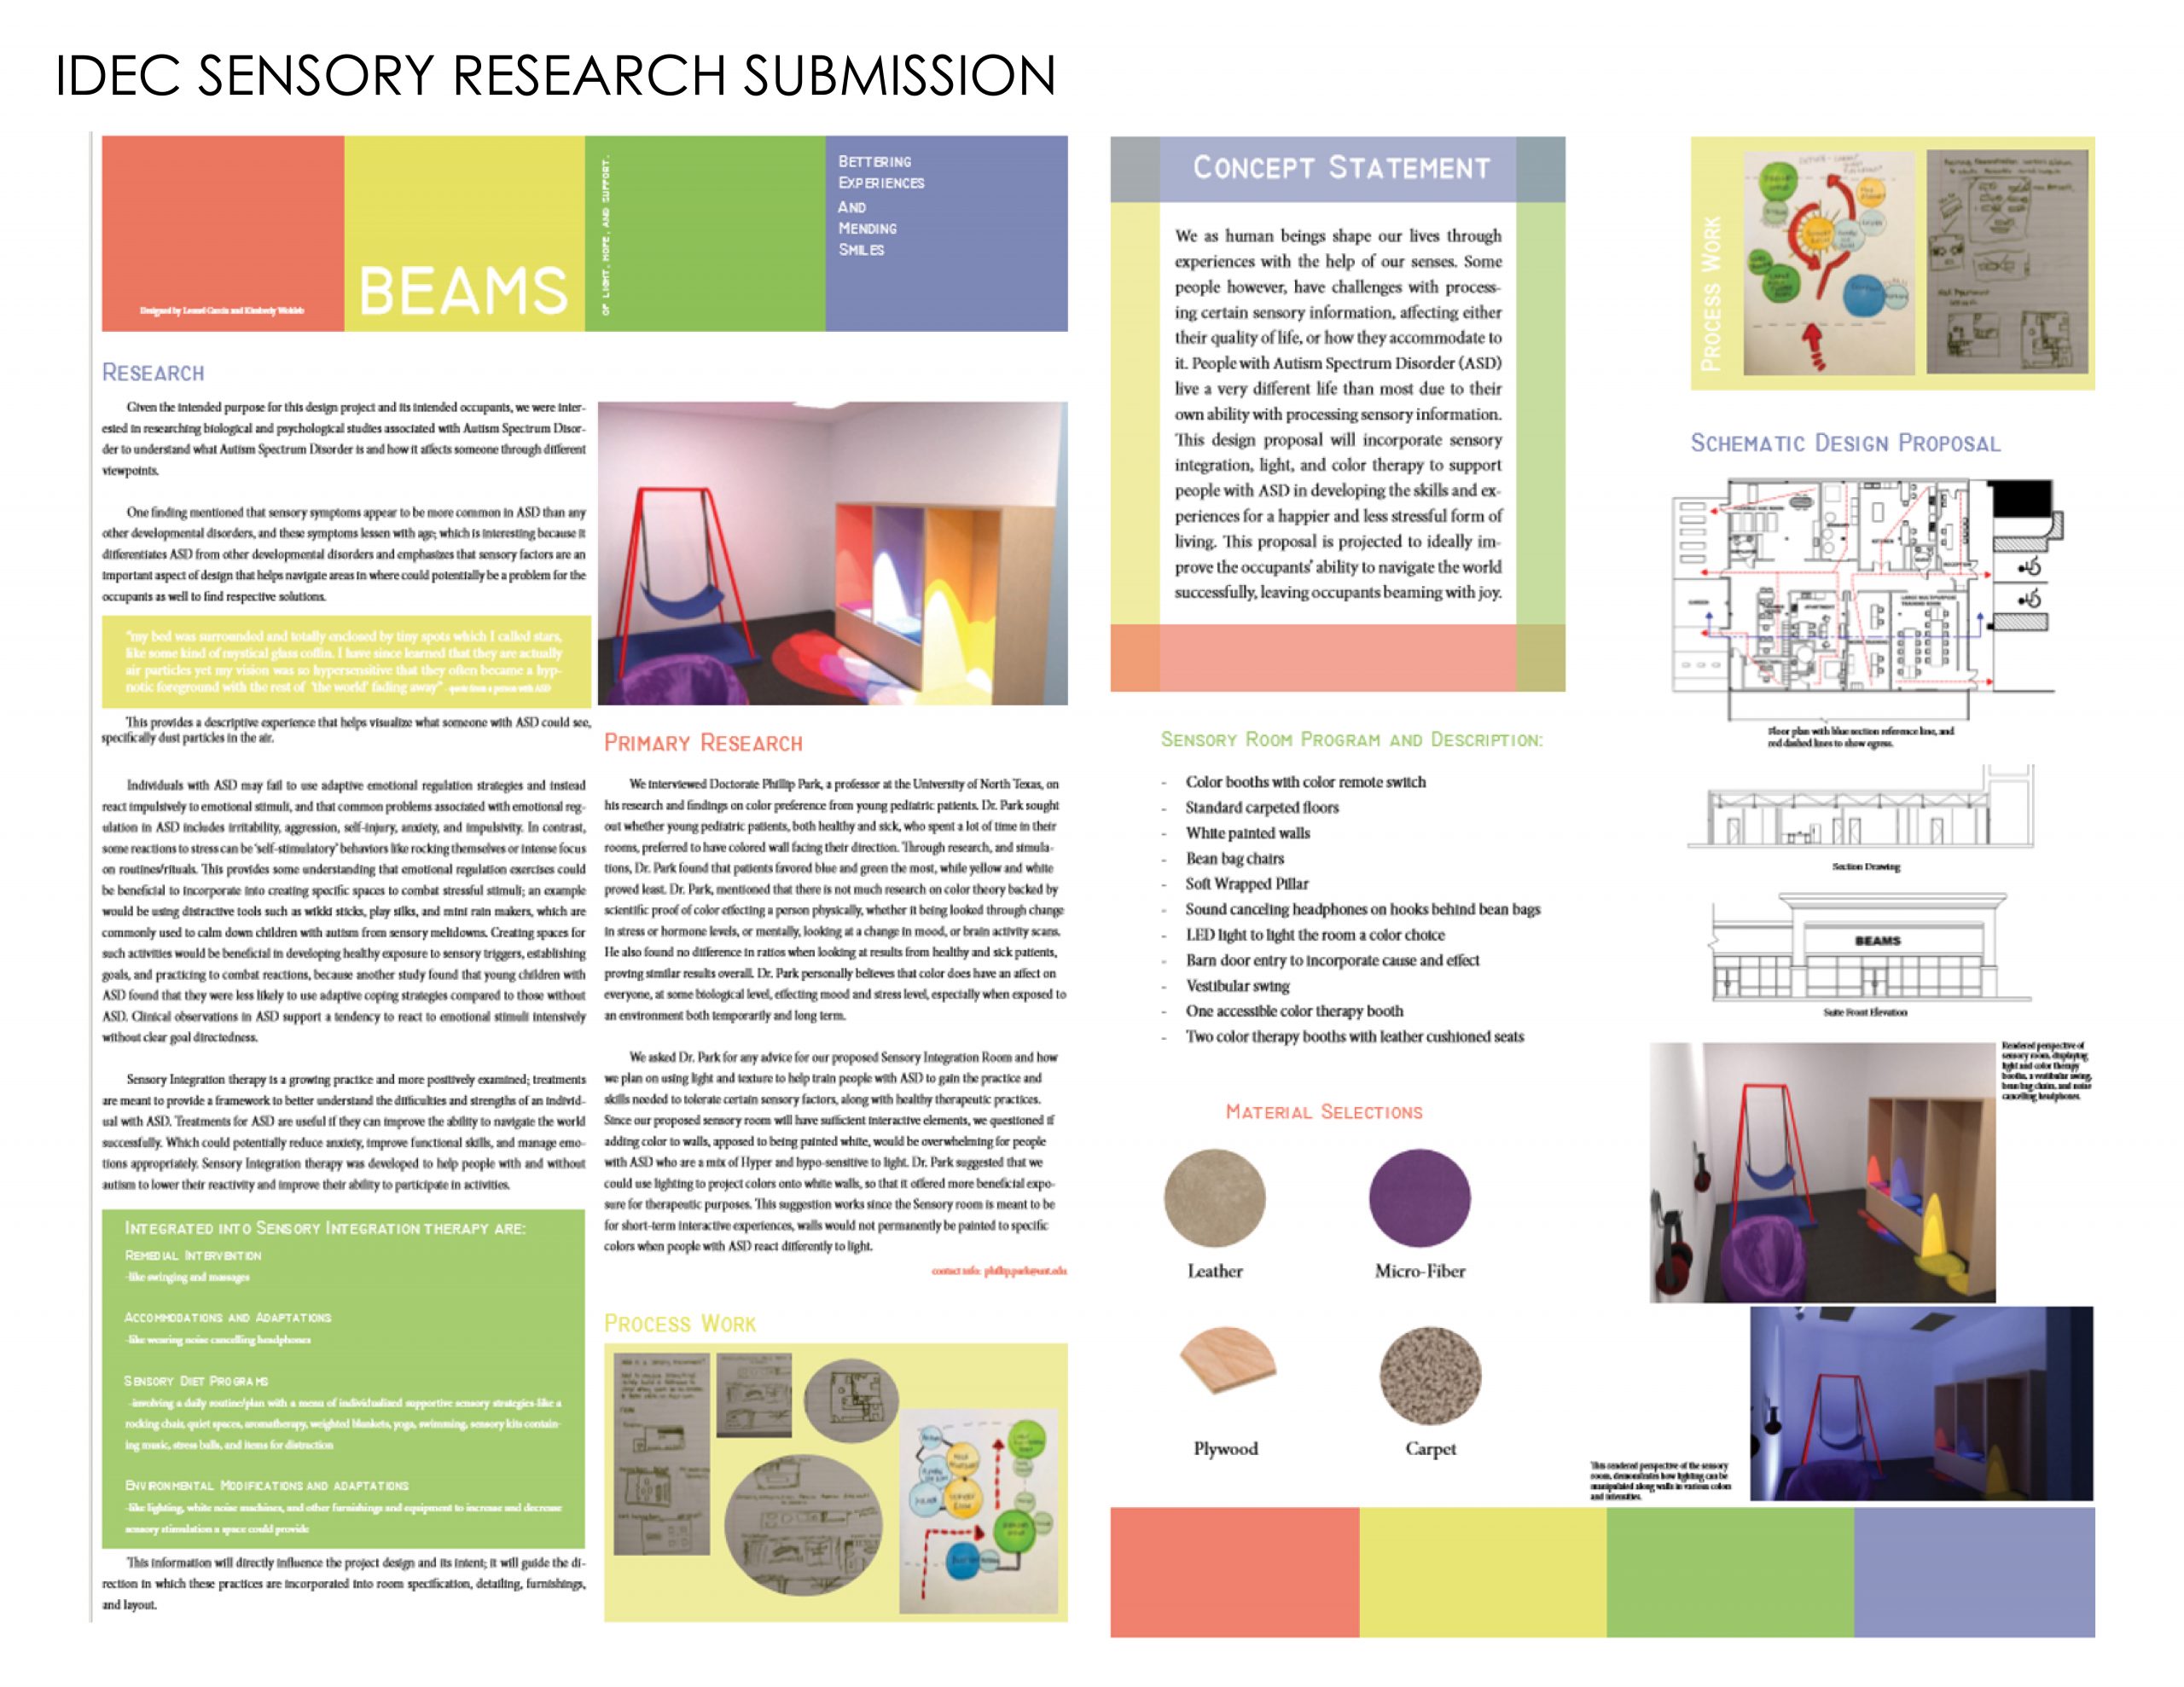 IDEC sensory research submission